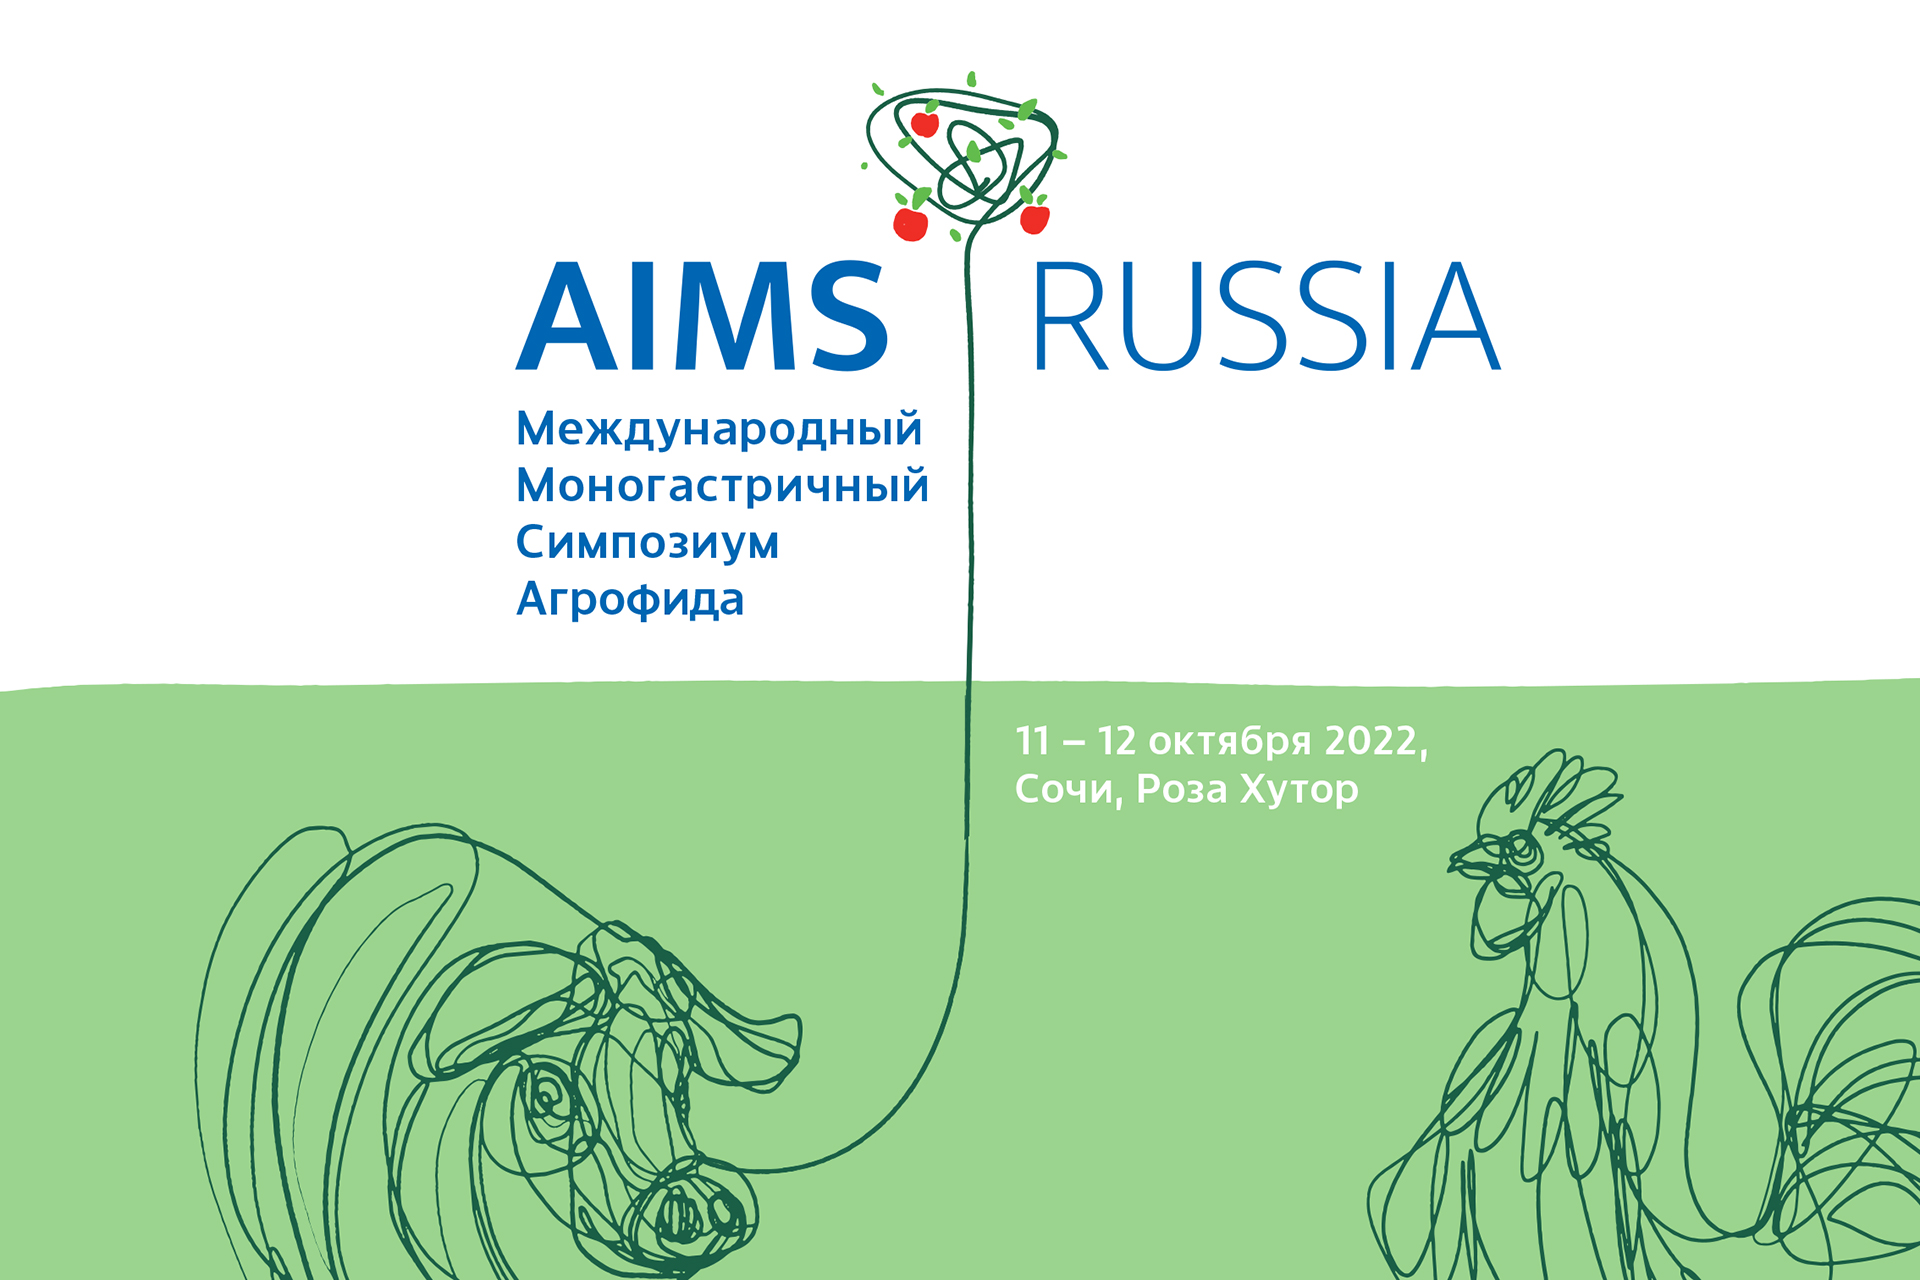 AIMS RUSSIA 2022